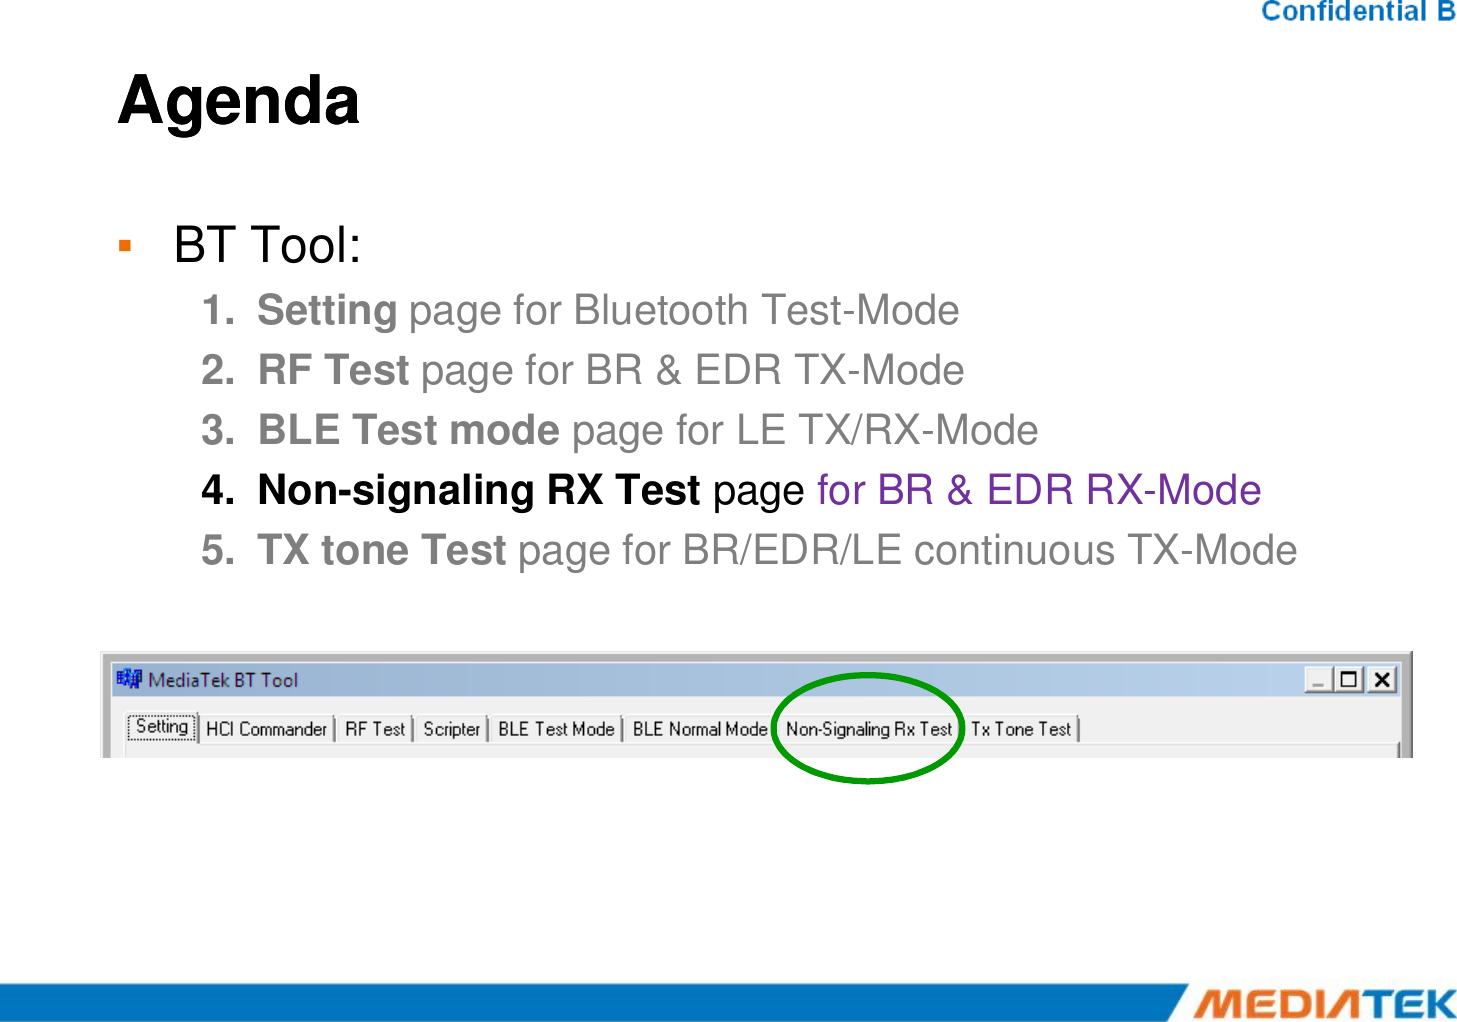 AgendaAgenda▪BT Tool:1.Setting page for Bluetooth Test-Mode 2.RF Test page for BR &amp; EDR TX-Mode 3.BLE Test mode page for LE TX/RX-Mode 4.Non-signaling RX Test page for BR &amp; EDR RX-Mode 5.TX tone Test page for BR/EDR/LE continuous TX-Mode 